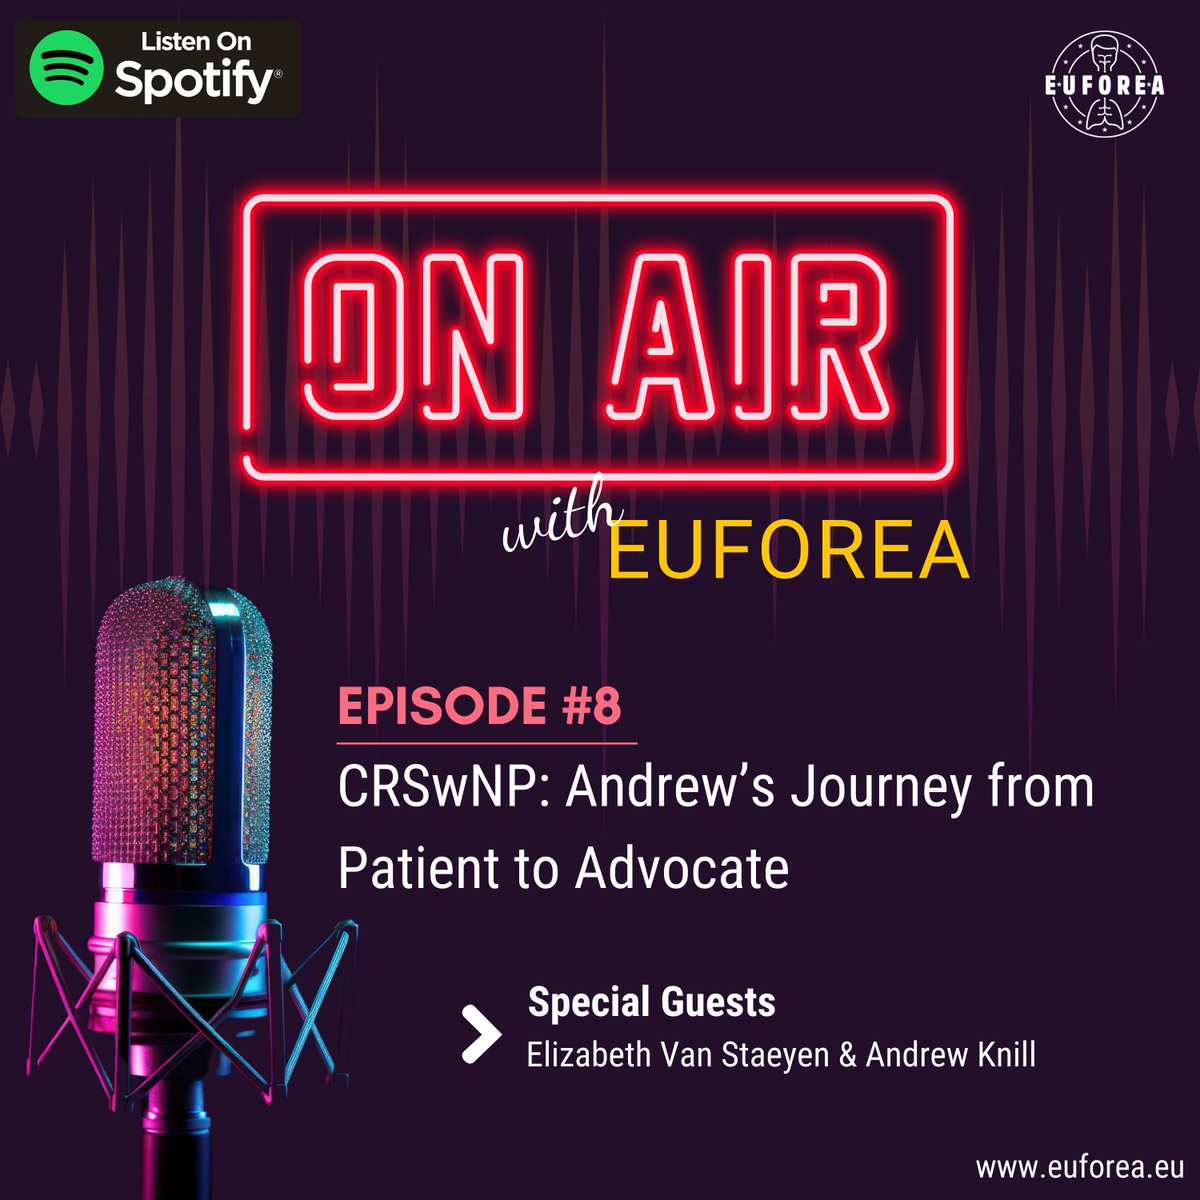 🫁 Chronic Rhinosinusitis with Nasal Polyps (CRSwNP): Andrew's Journey from Patient to Advocate! New ON AIR with EUFOREA #podcast episode is out now! Listen to the journey of #CRSwNP patient @andrewknill and how he became empowered to become an advocate! rss.com/podcasts/onair…